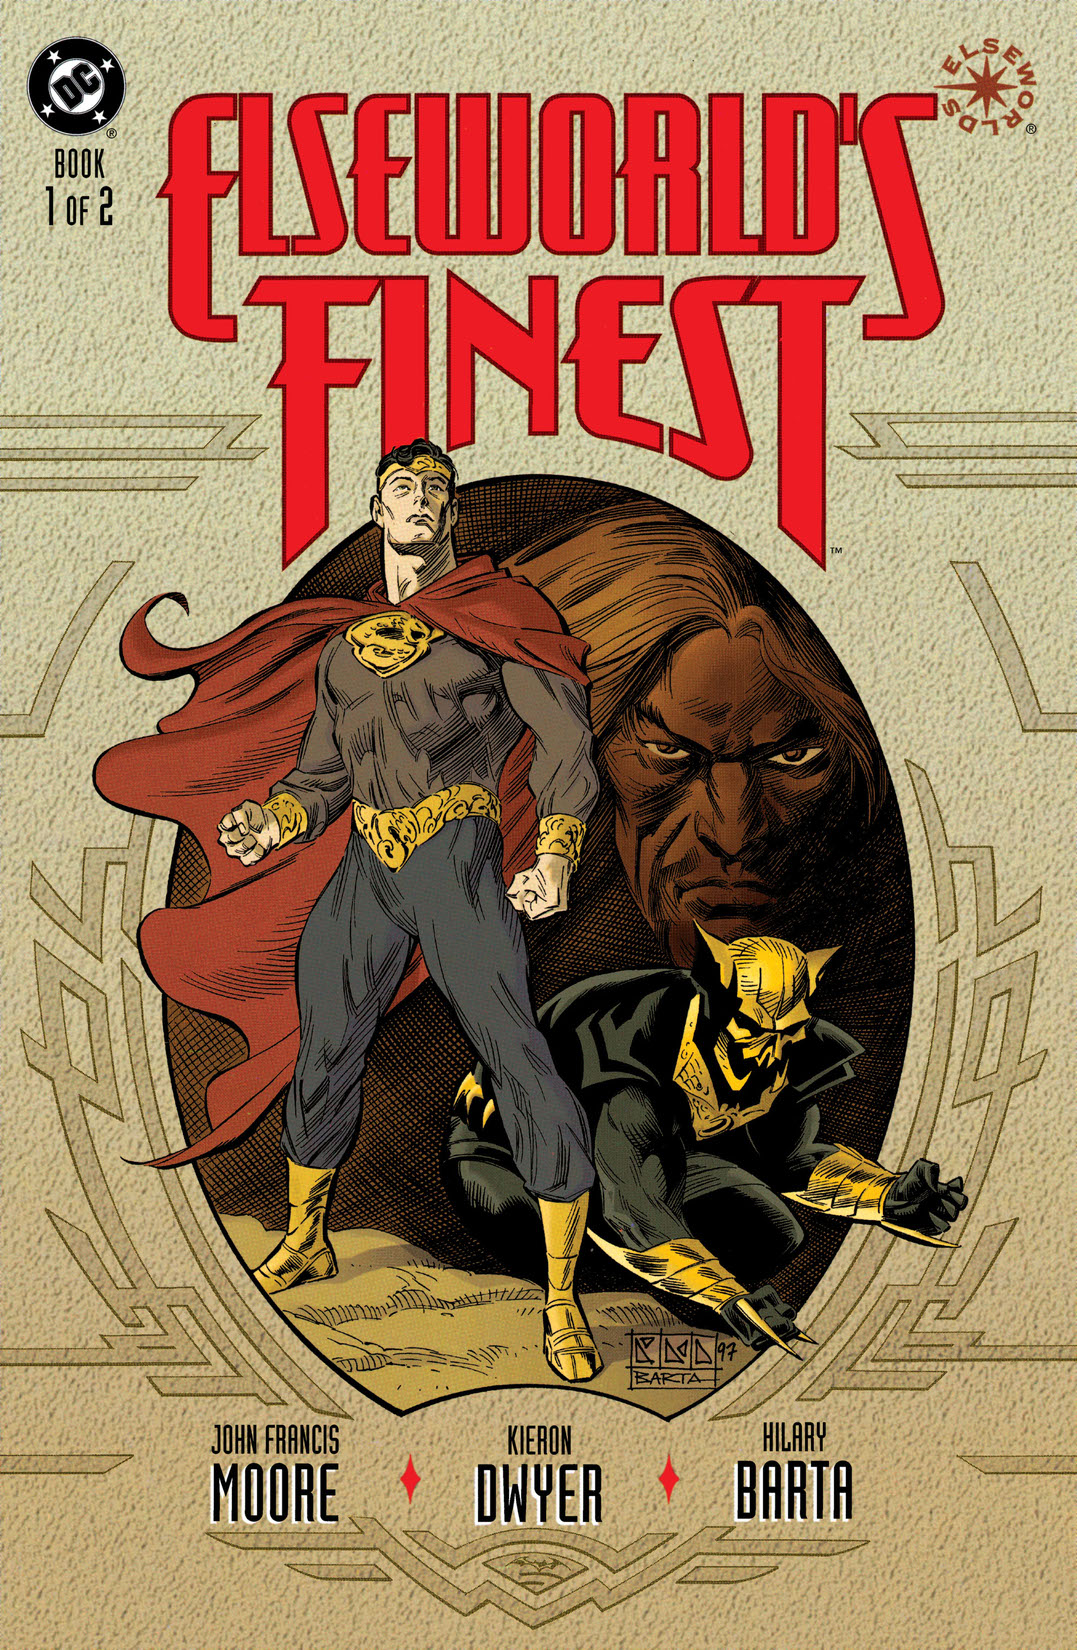 Elseworld's Finest #1 preview images